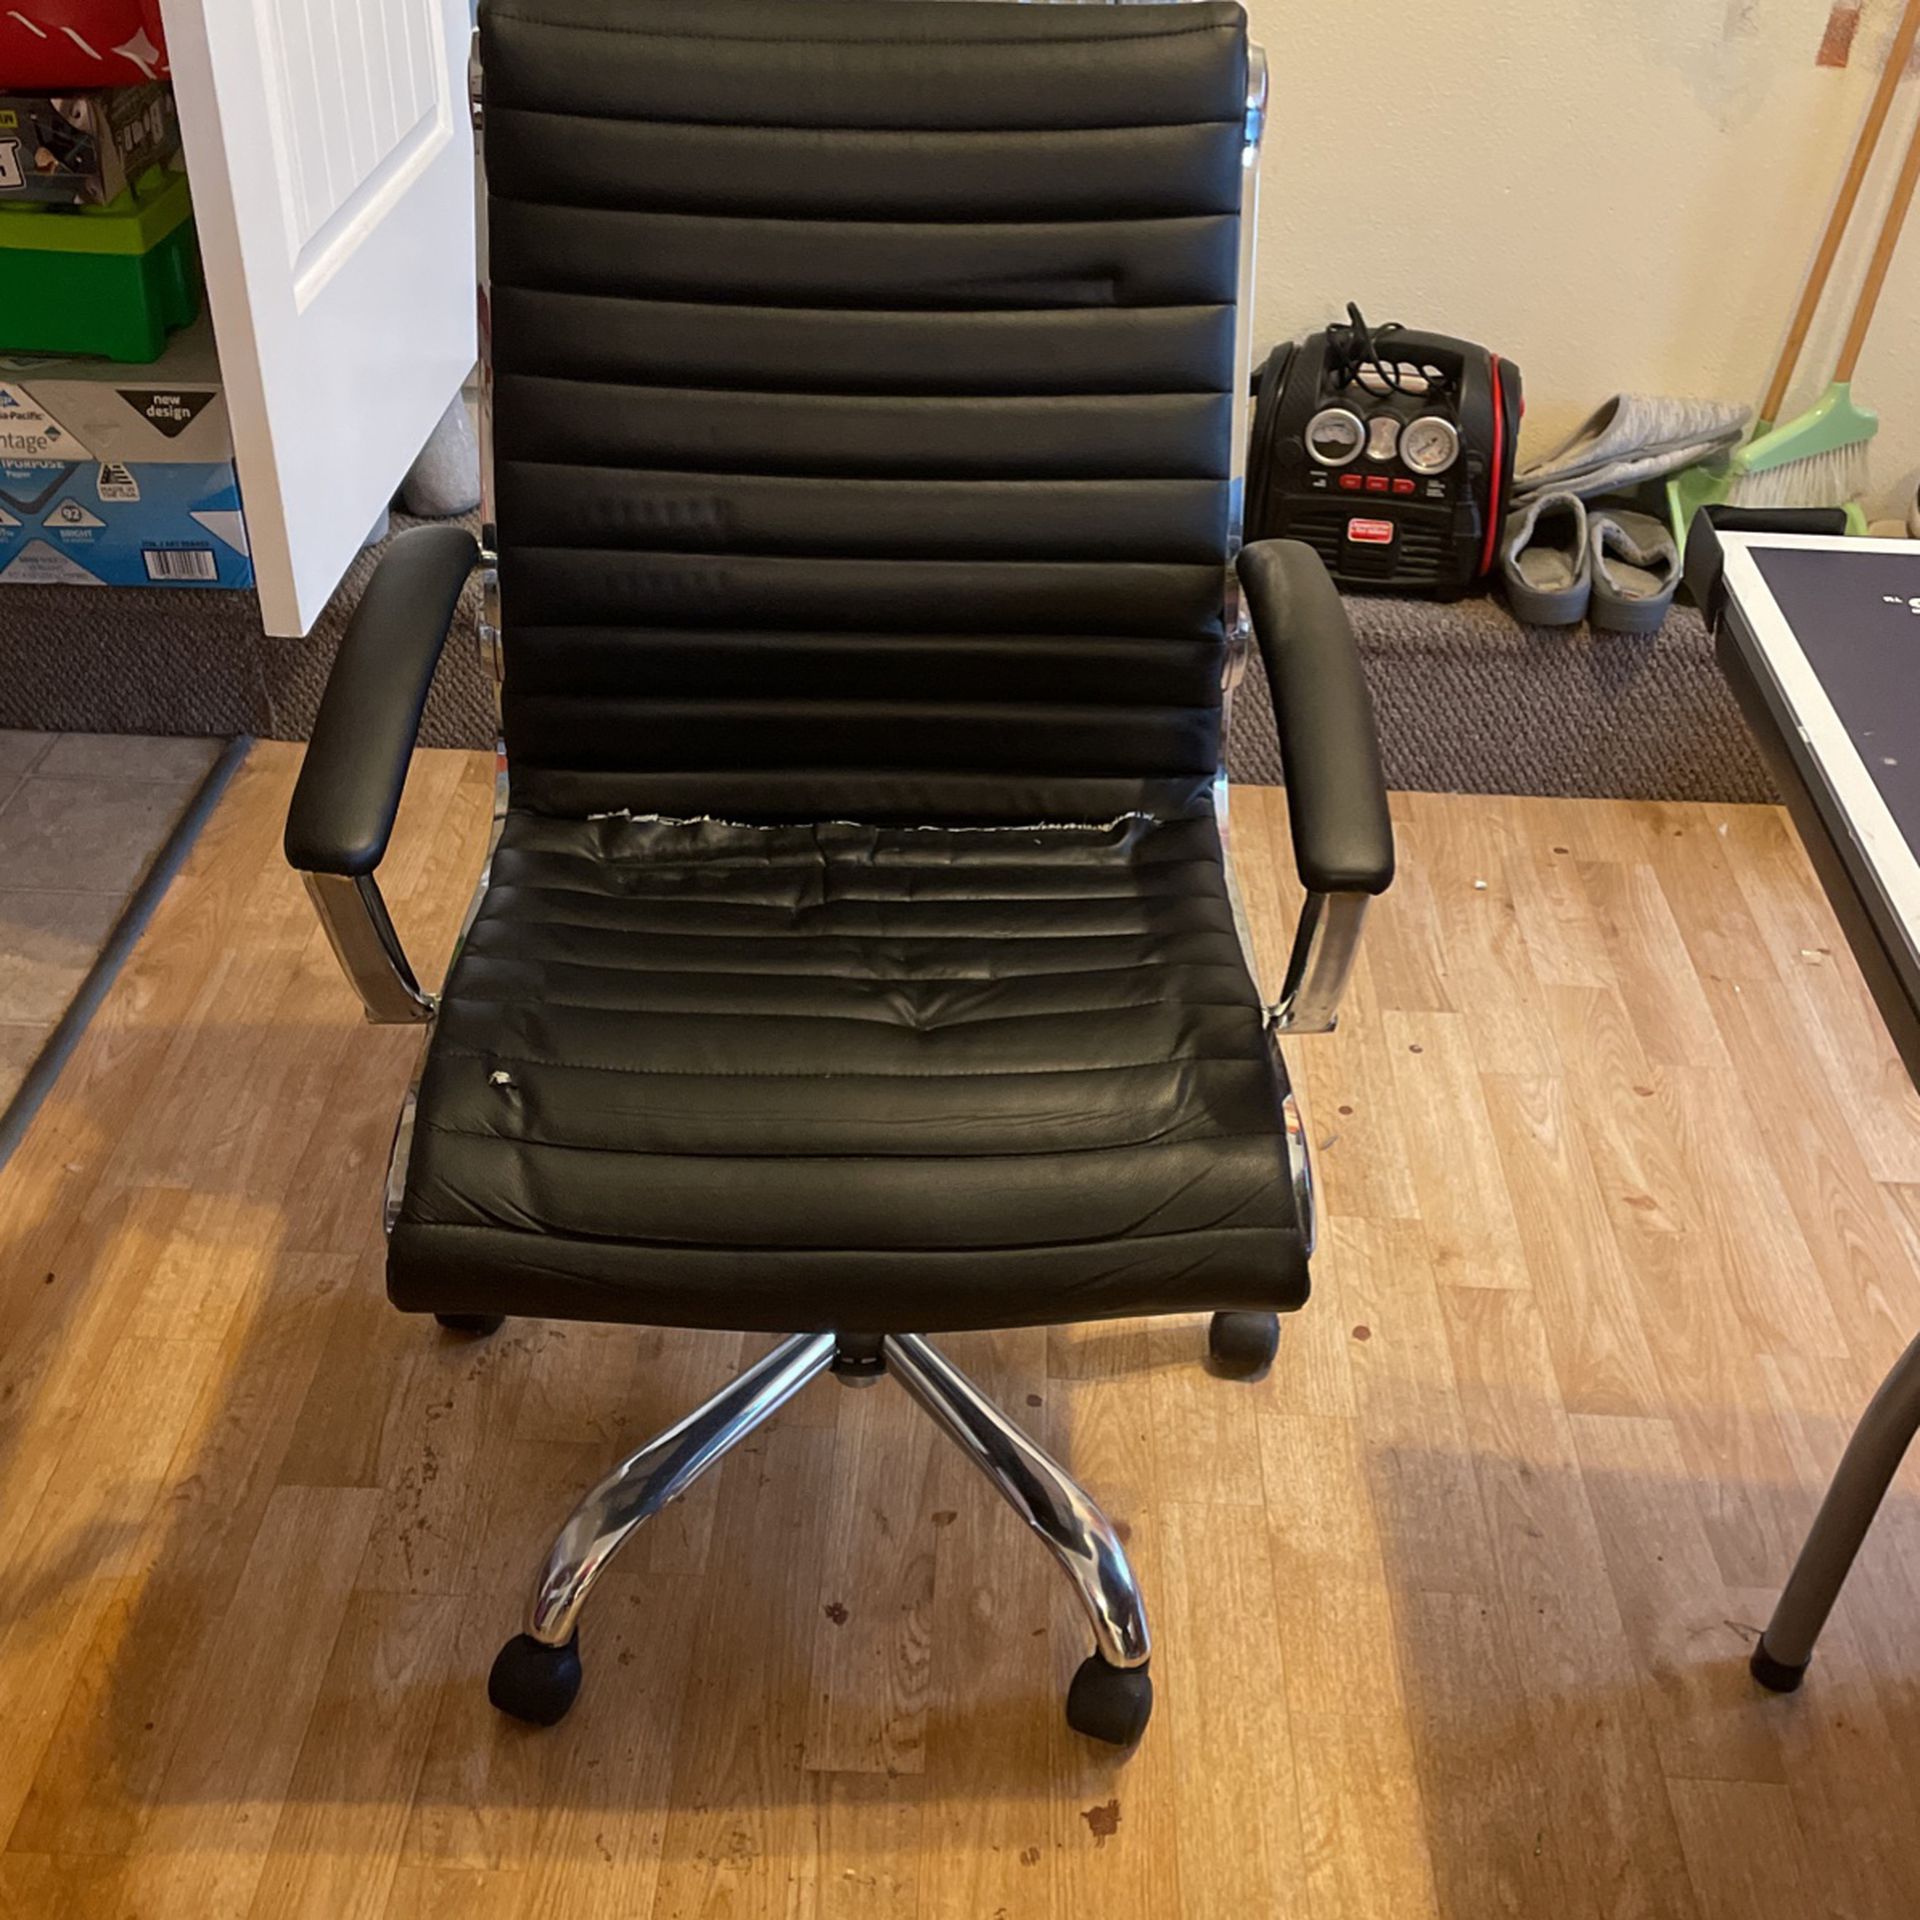 FREE - Office Chair (needs TLC)